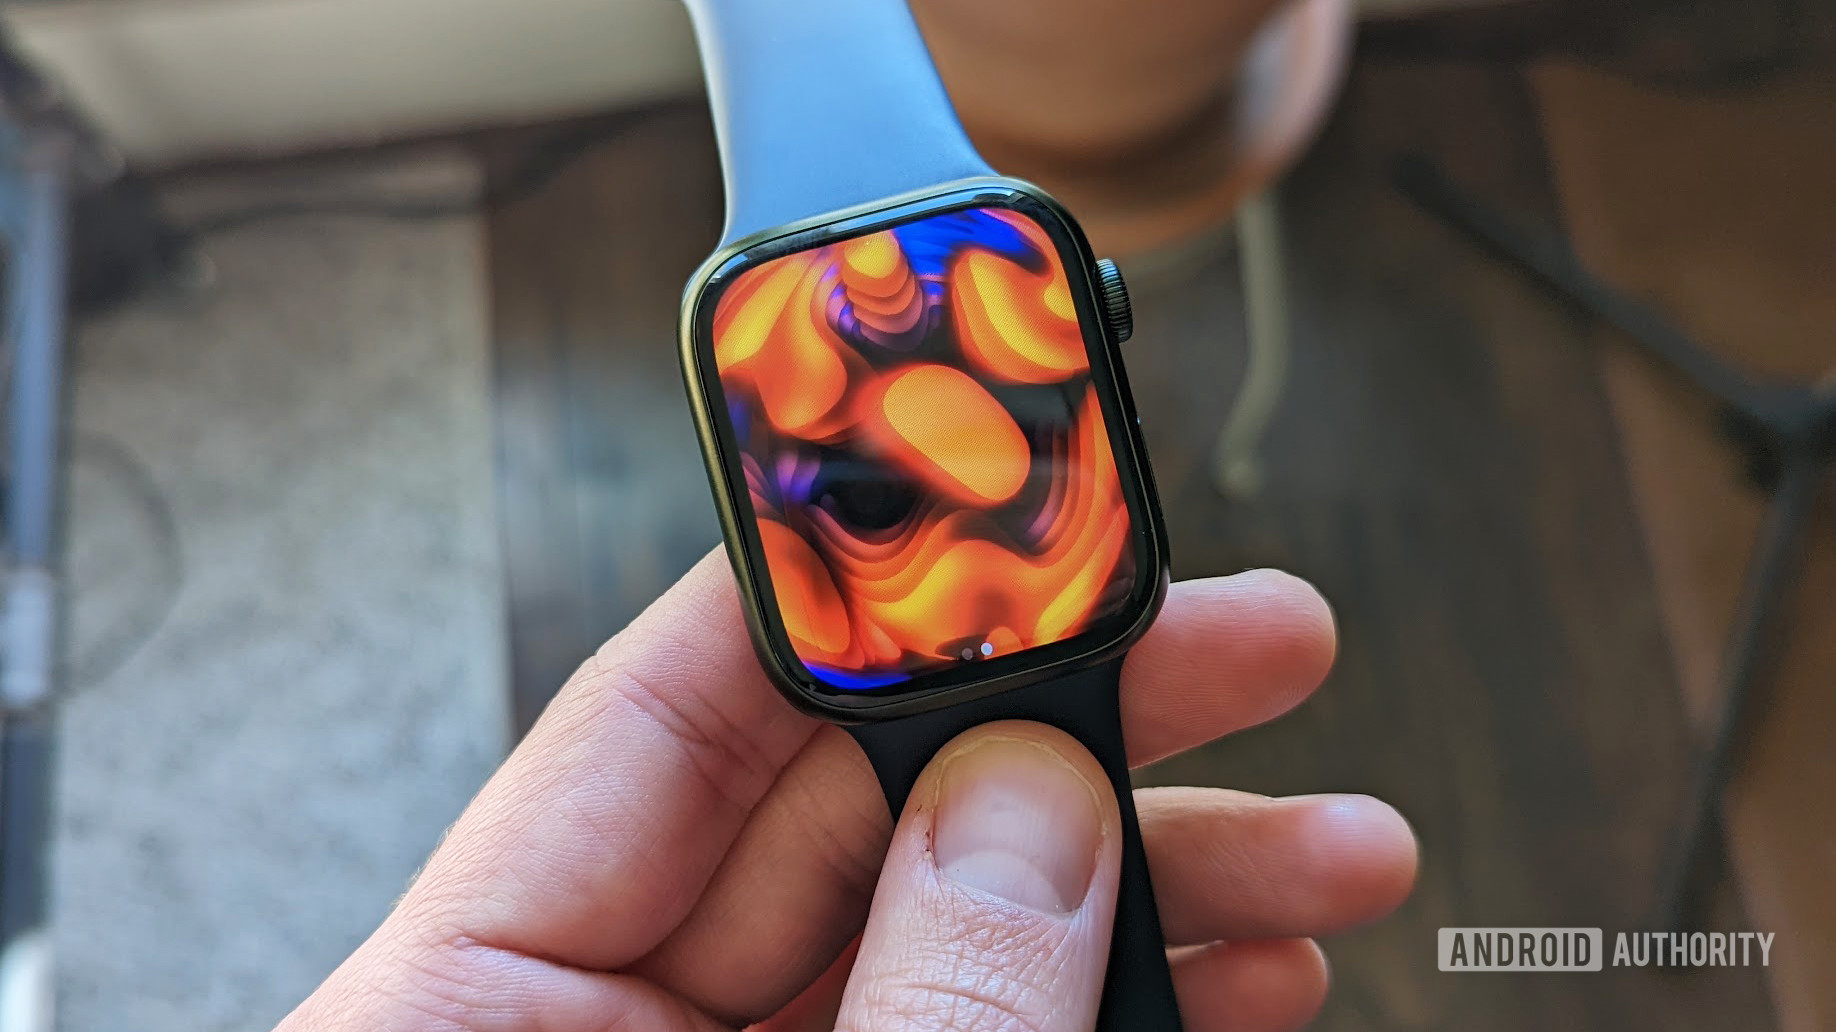 The Apple Watch Series 7 showing the Mindfulness app Reflect feature